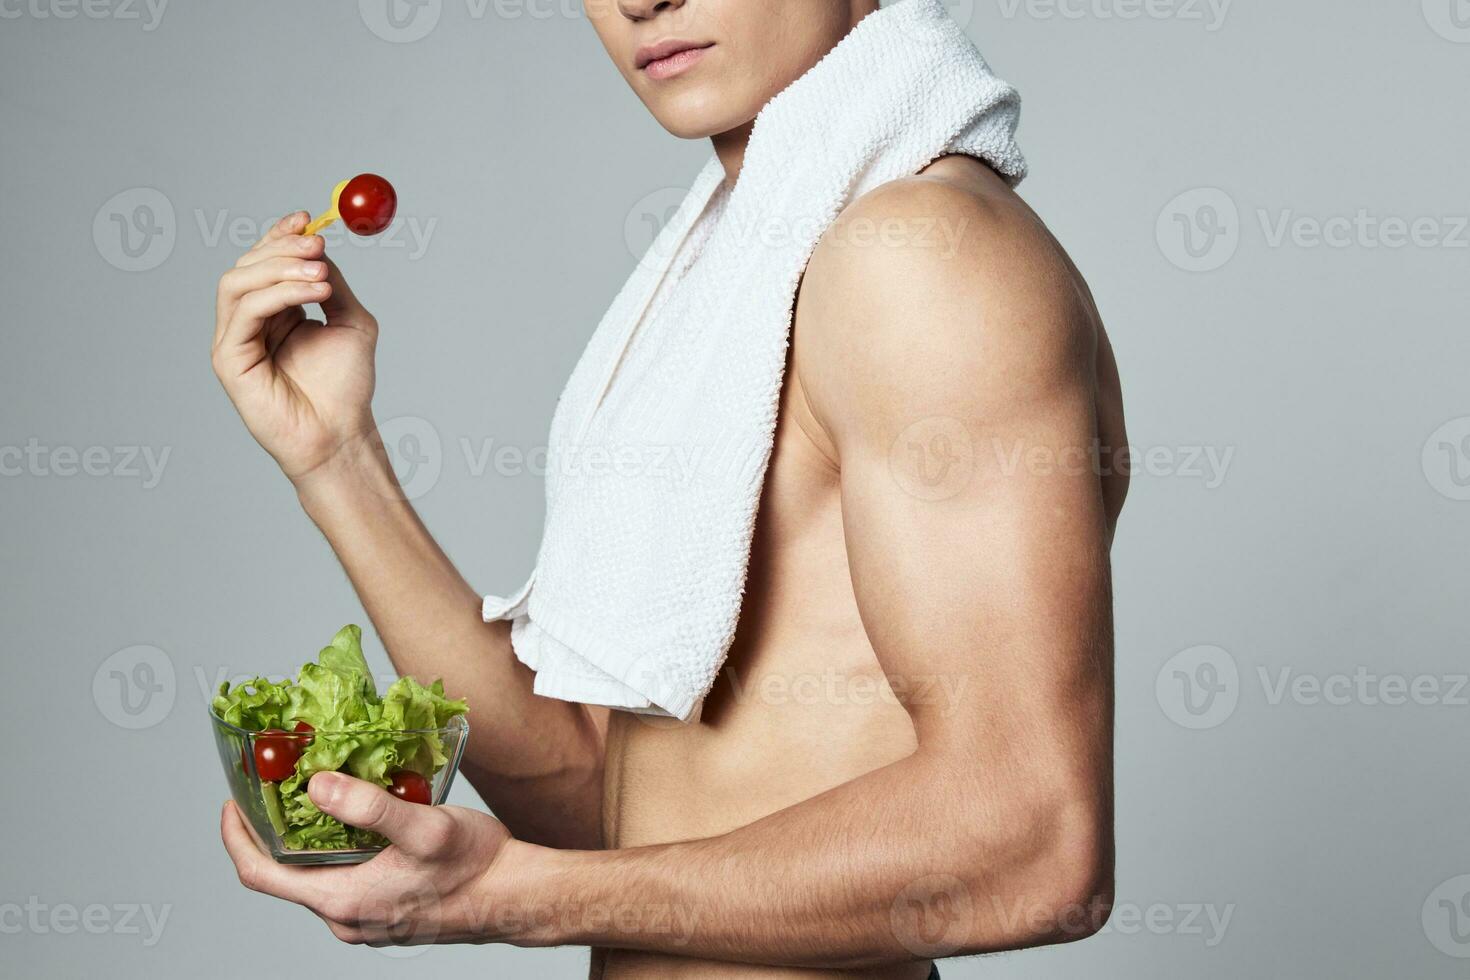 athletic man bodybuilder healthy eating plate salad close-up photo